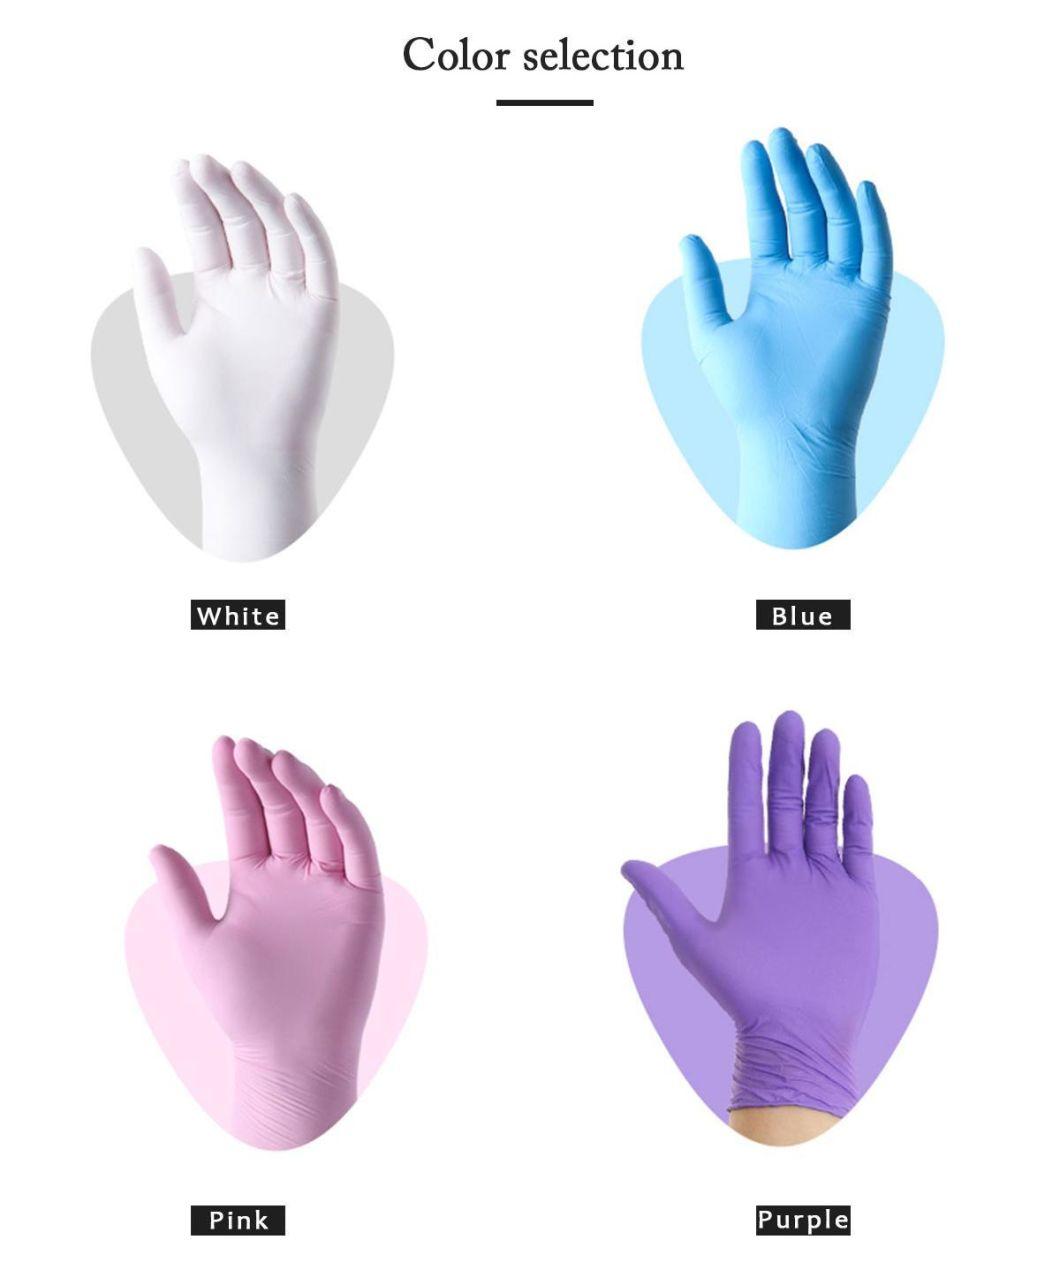 Blue Protective Working Powder Free Disposable Nitrile Gloves